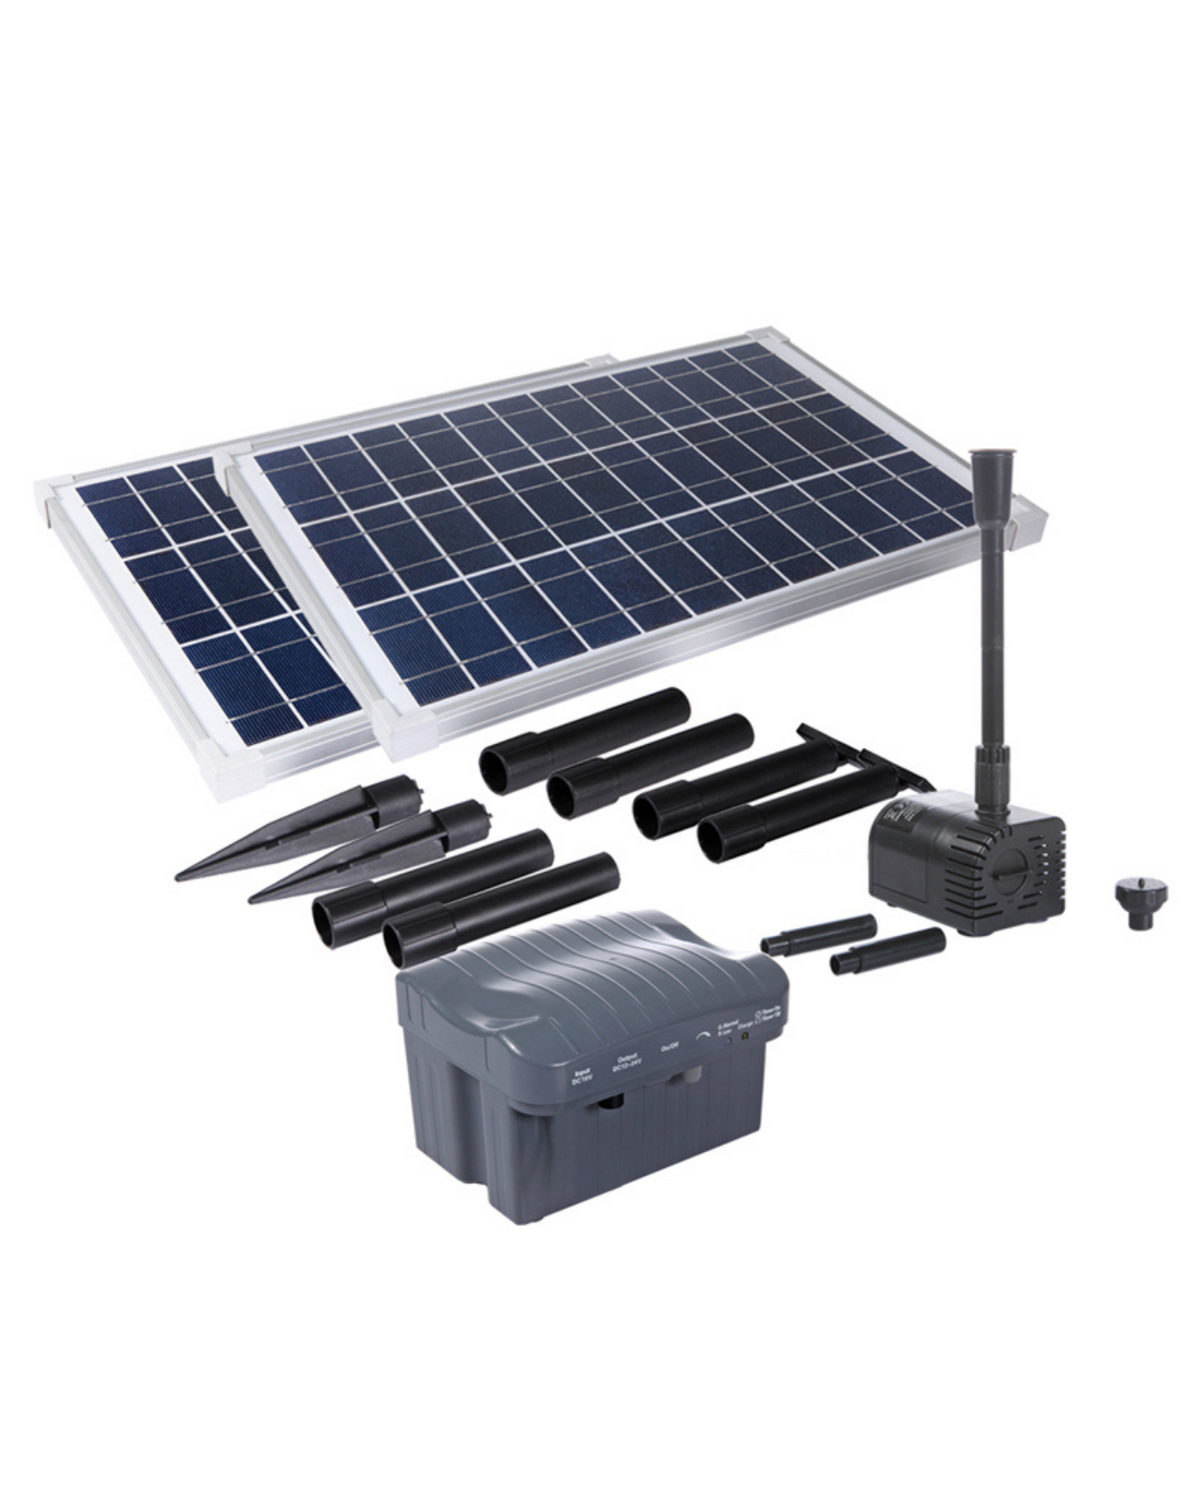 RSFB1600 Solar Fountain Pump with Battery Backup 